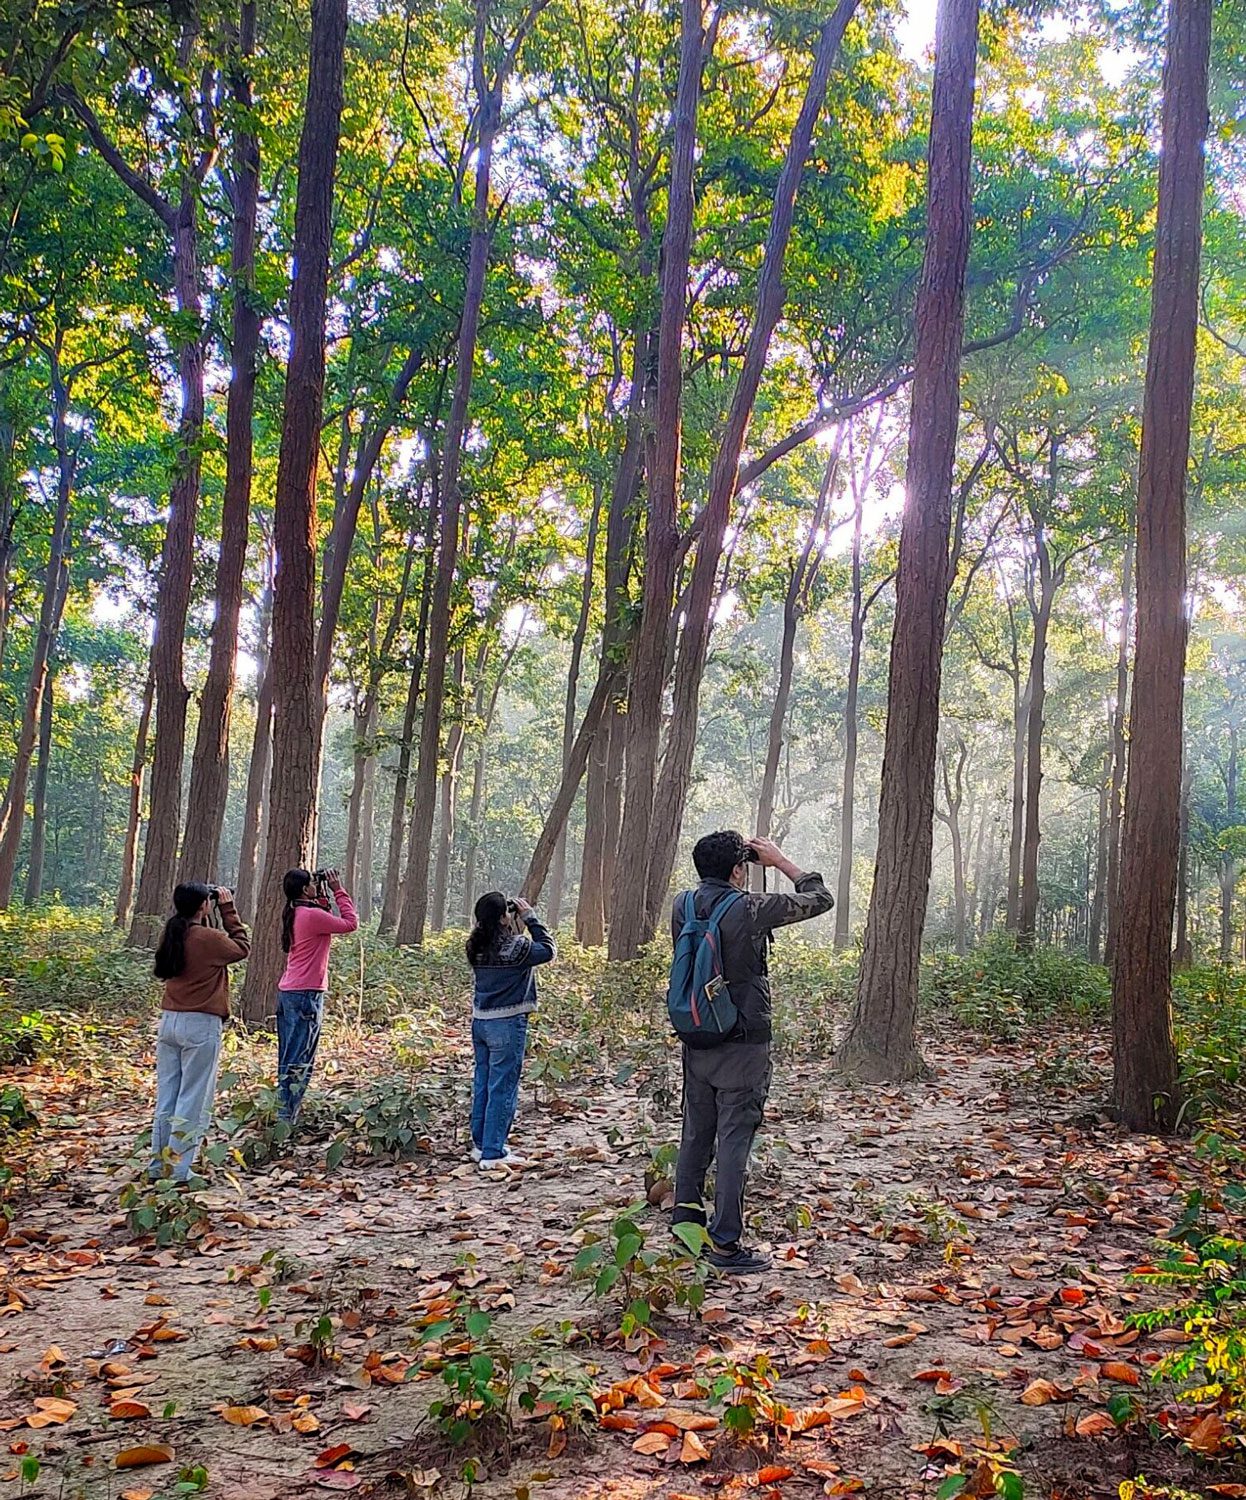 Four people birdwatching in a forest.